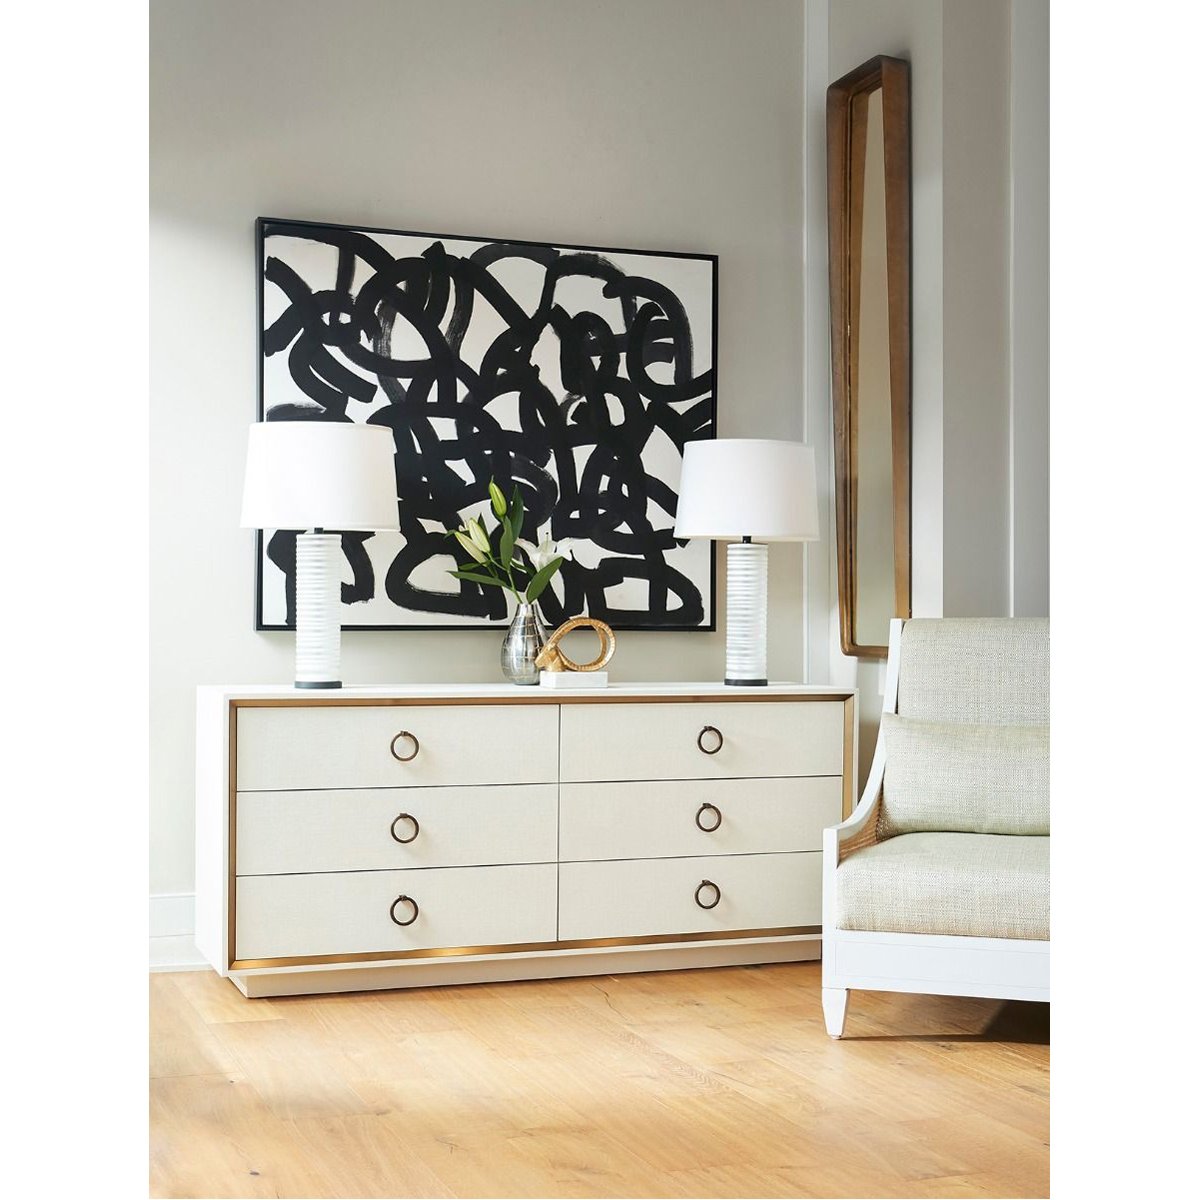 Villa &amp; House Ansel Extra Large 6-Drawer Dresser with Santino Pull